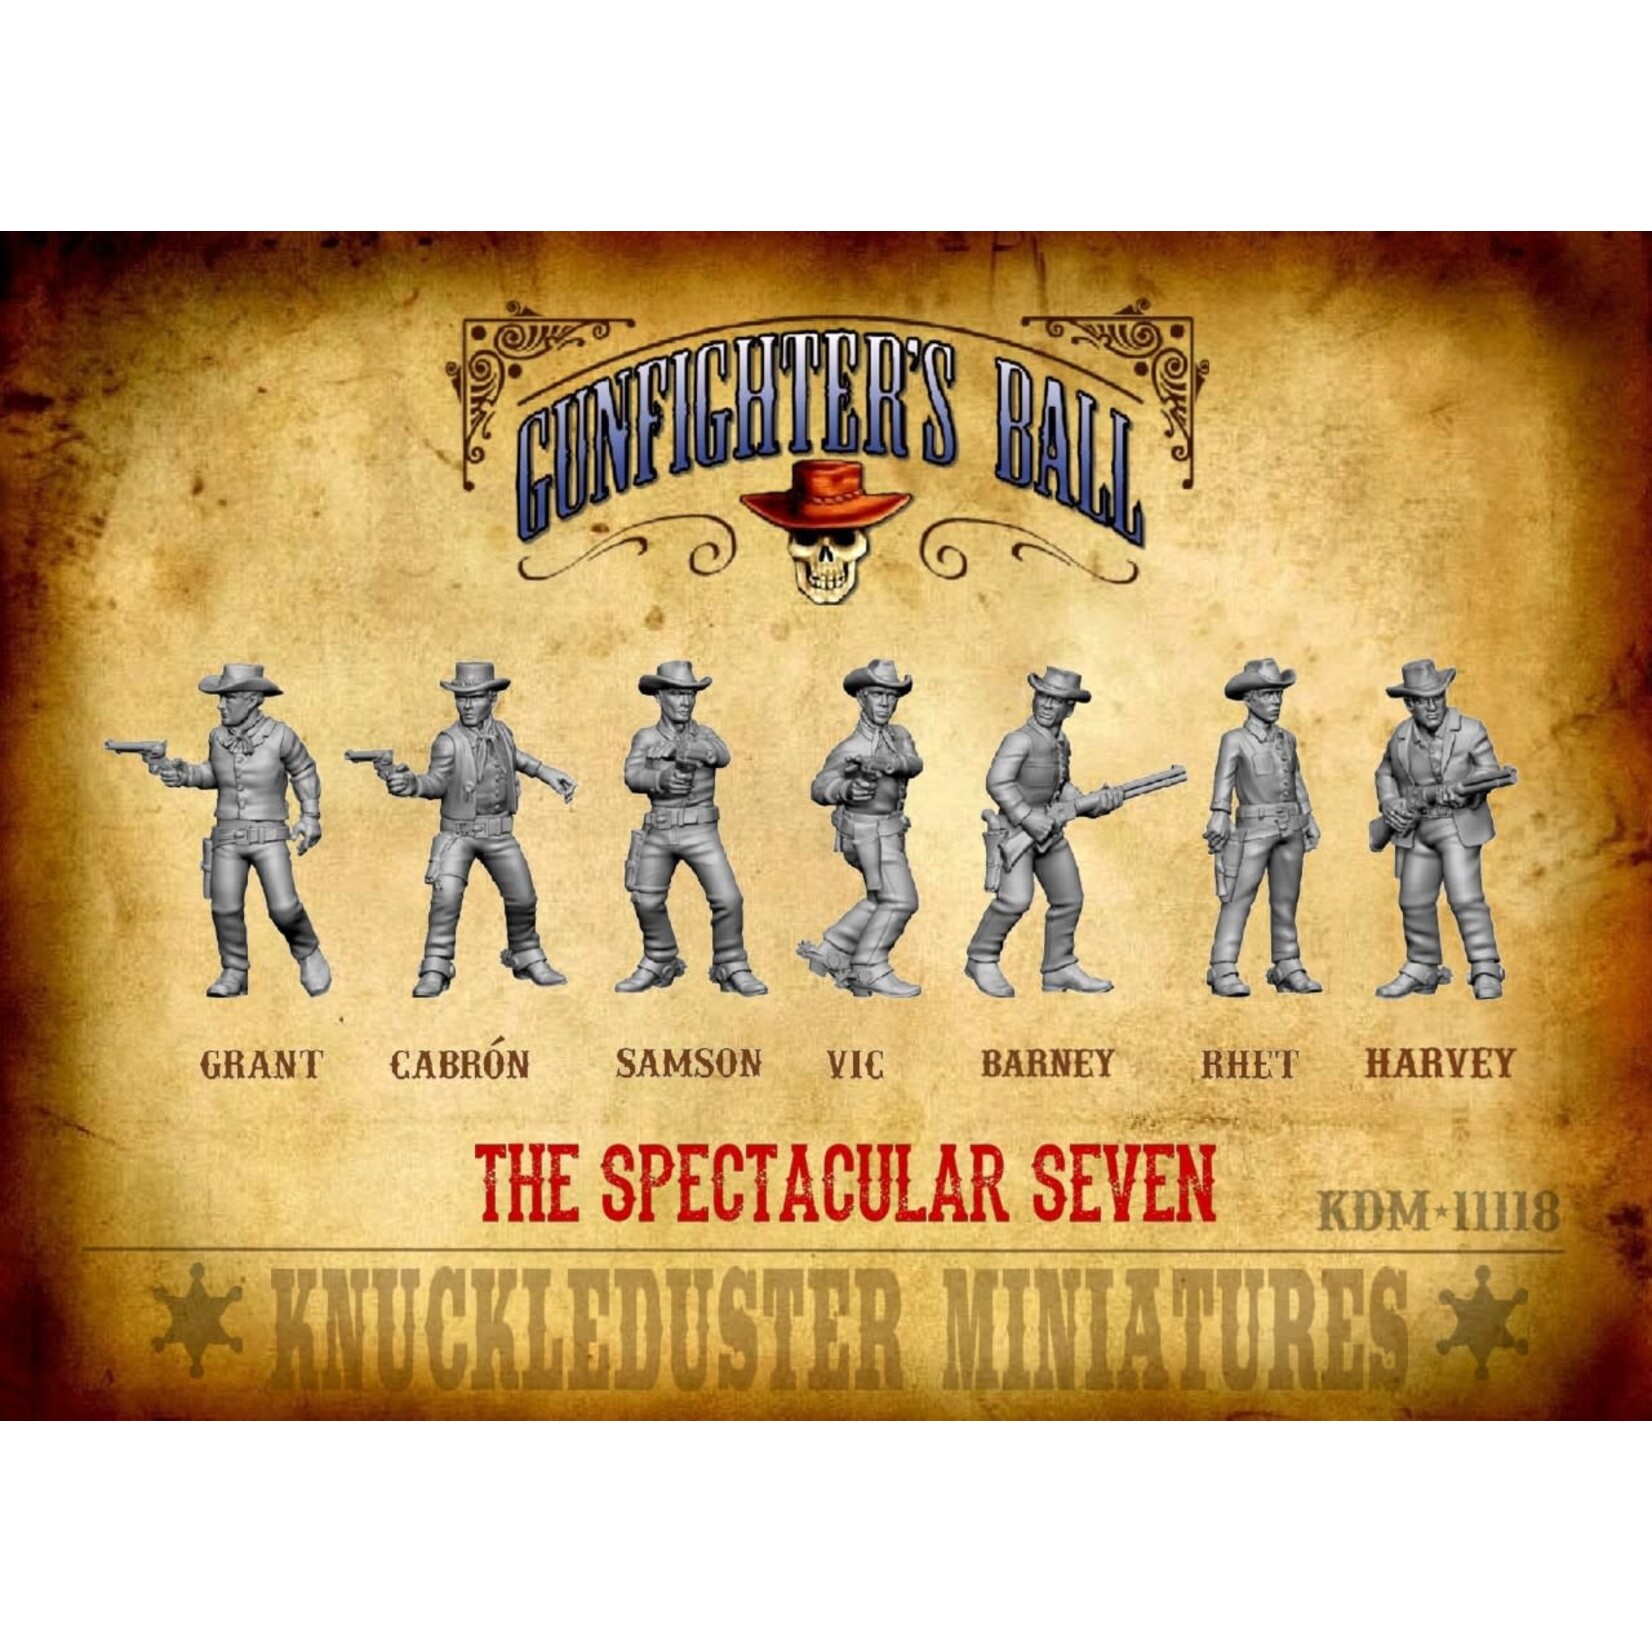 Knuckleduster Miniatures The Spectacular Seven